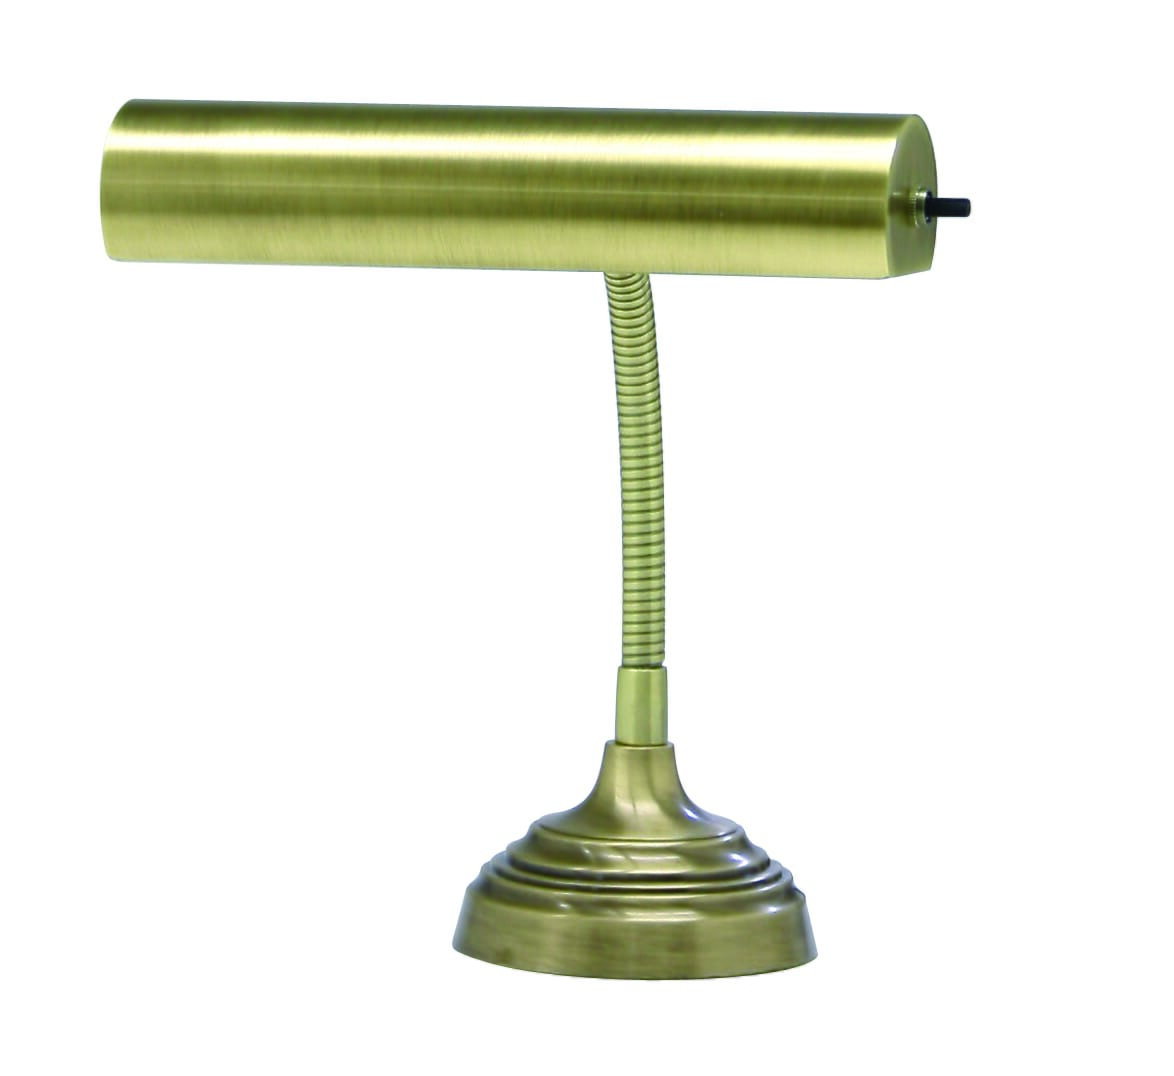 Advent 10"" Antique Brass Piano Desk Lamp -  House of Troy, AP10-20-71